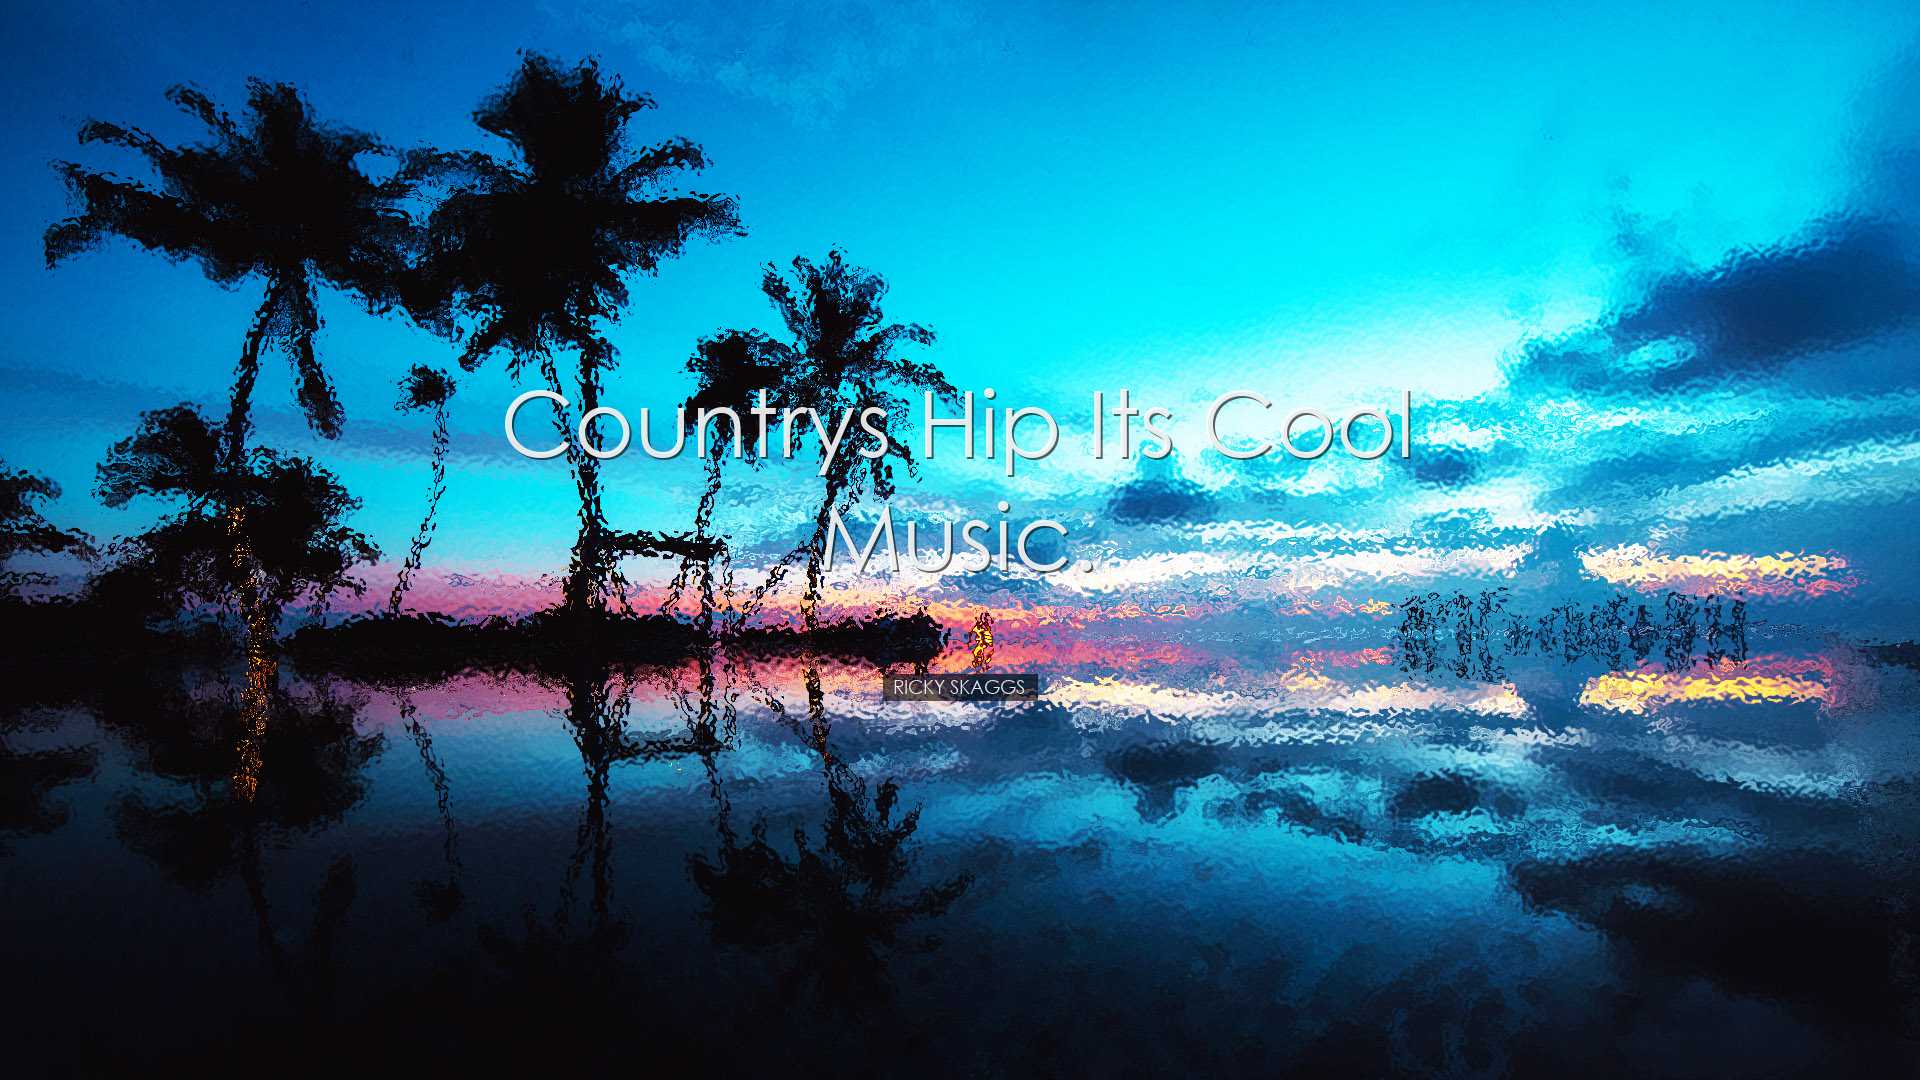 Countrys hip its cool music. - Ricky Skaggs